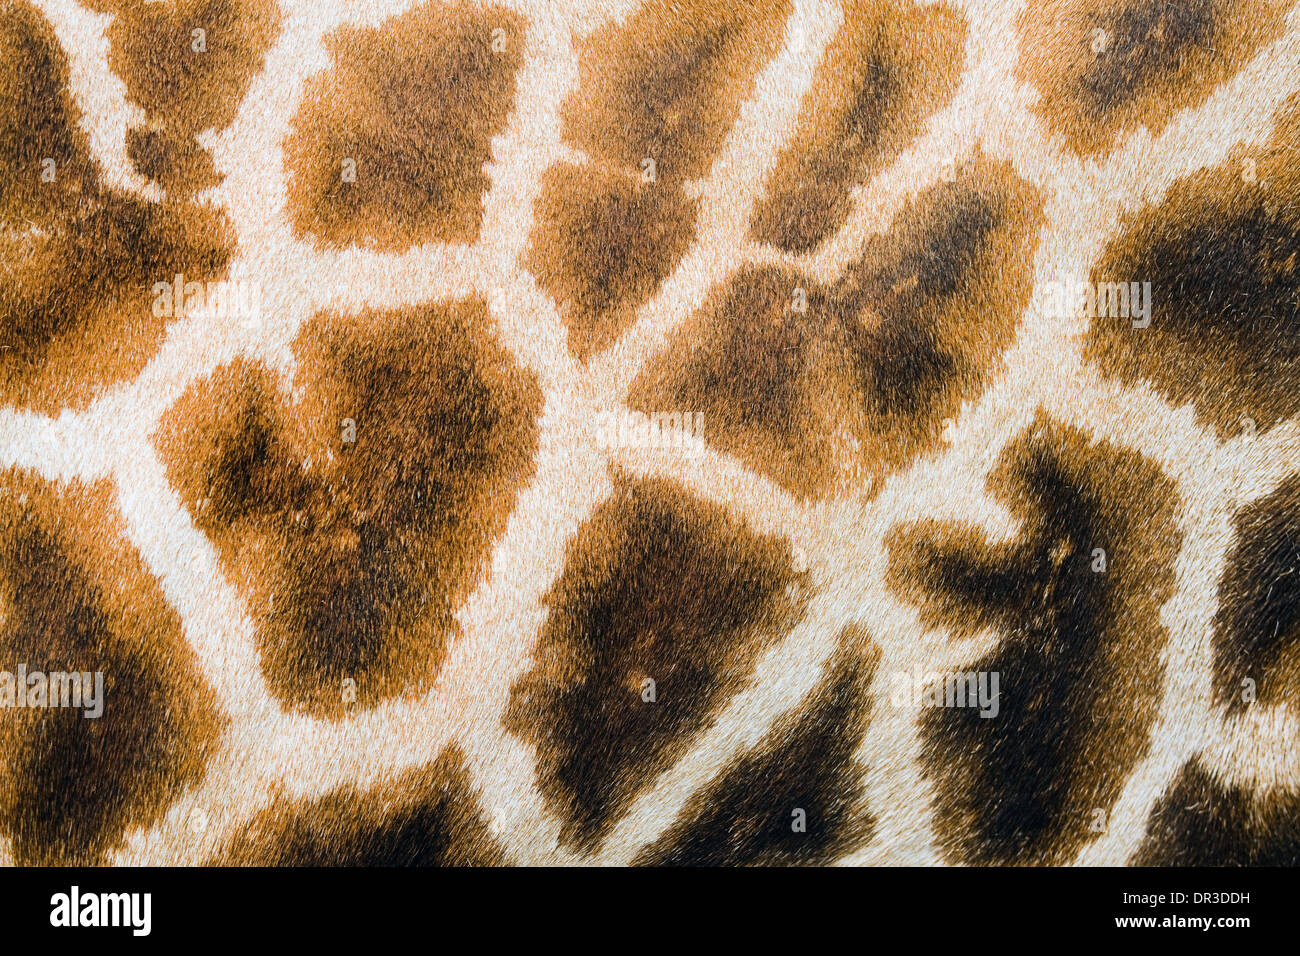 Background of furry giraffe skin with light and dark brown spots Stock Photo